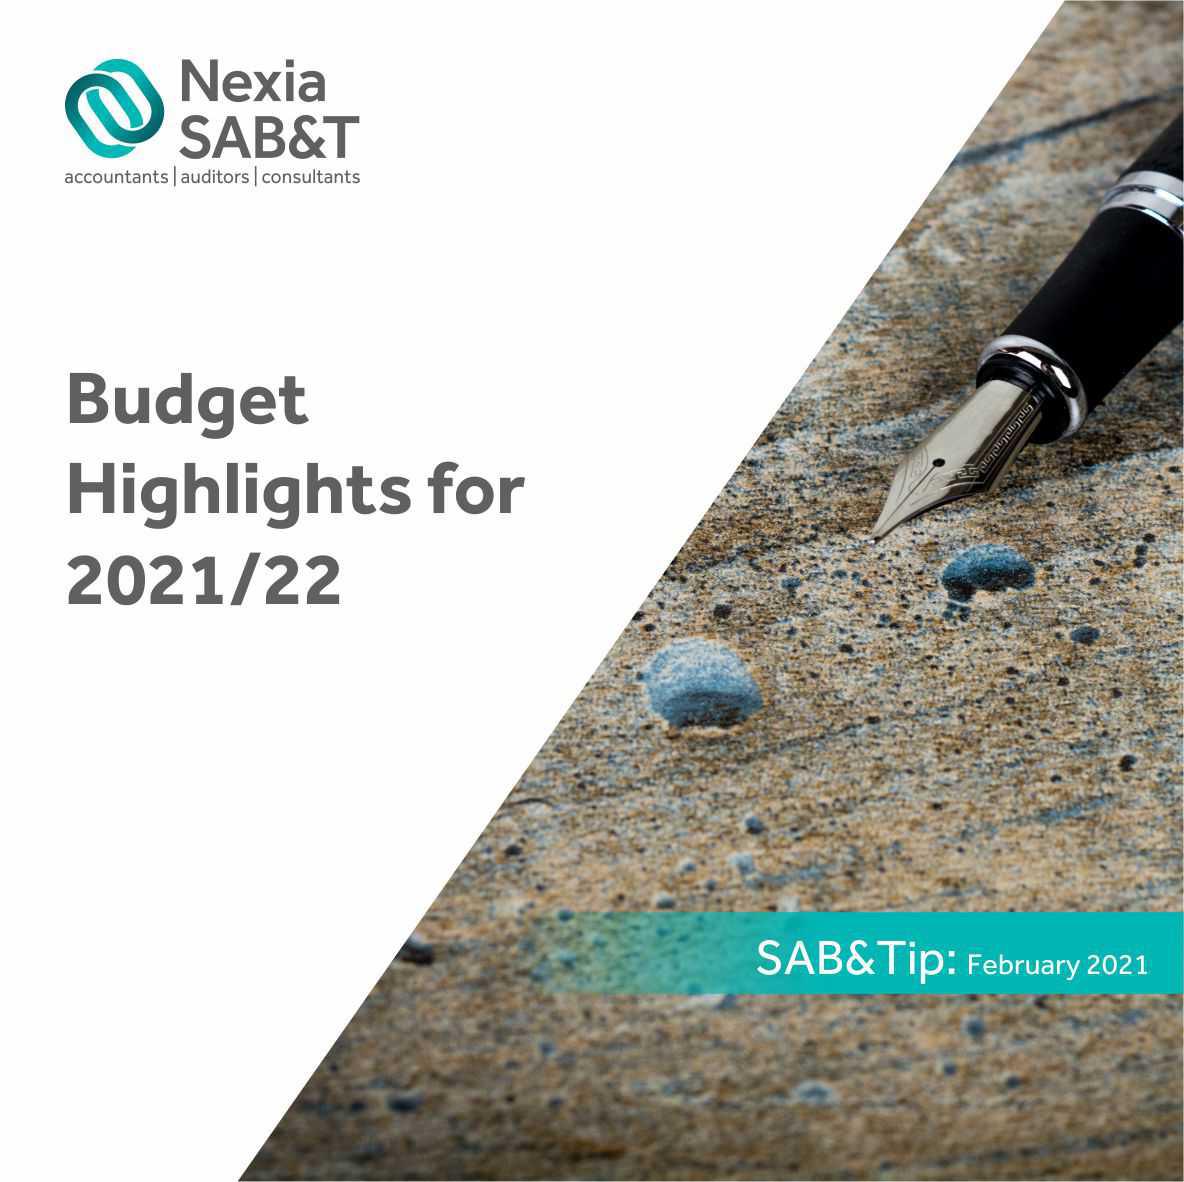 Budget Highlights for 2021/22 